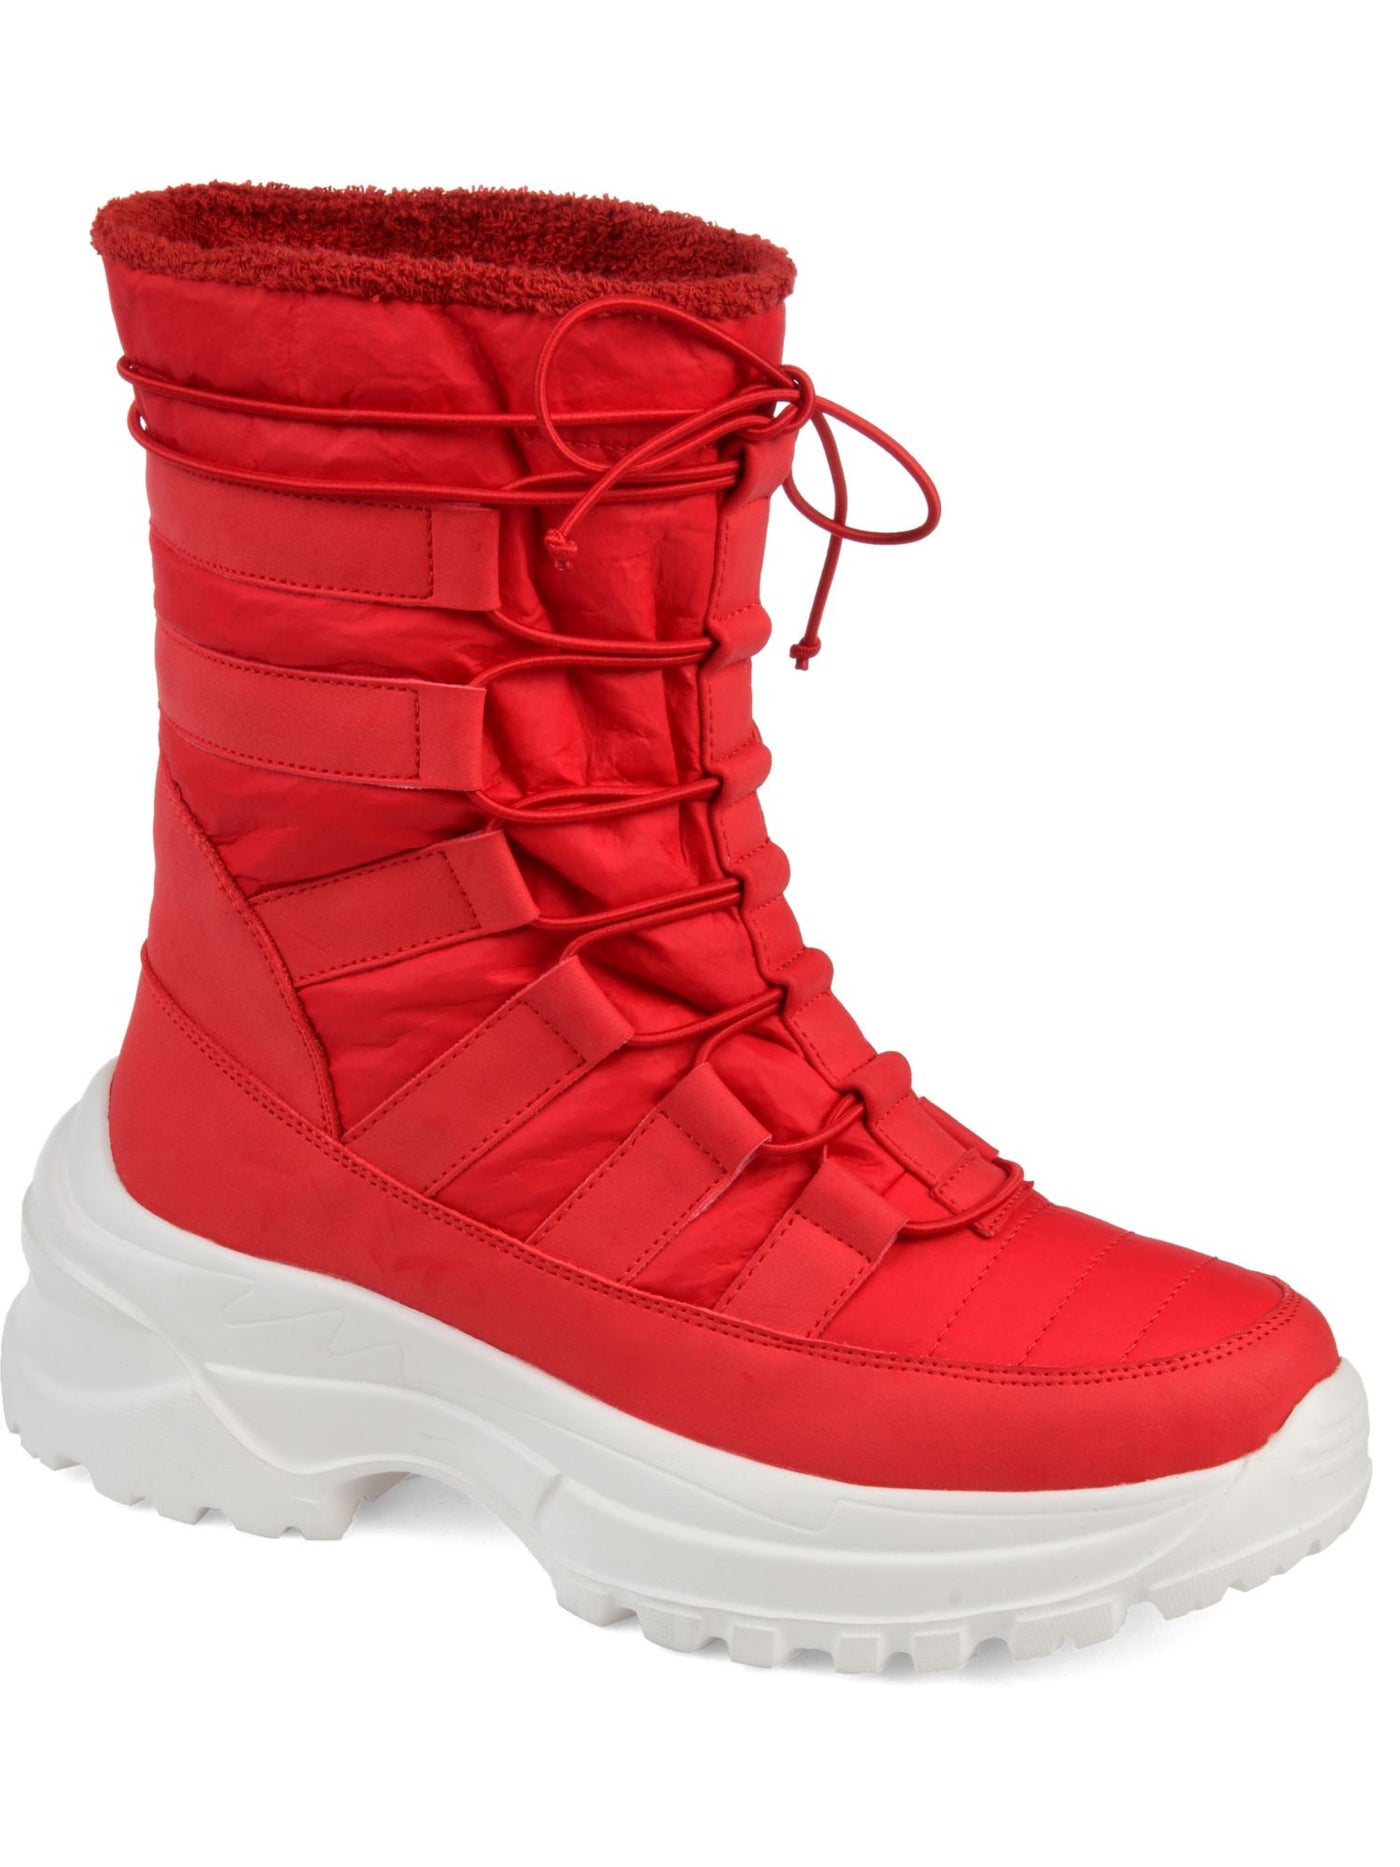 JOURNEE COLLECTION Womens Red Waterproof Icey Round Toe Platform Lace-Up Snow Boots 10